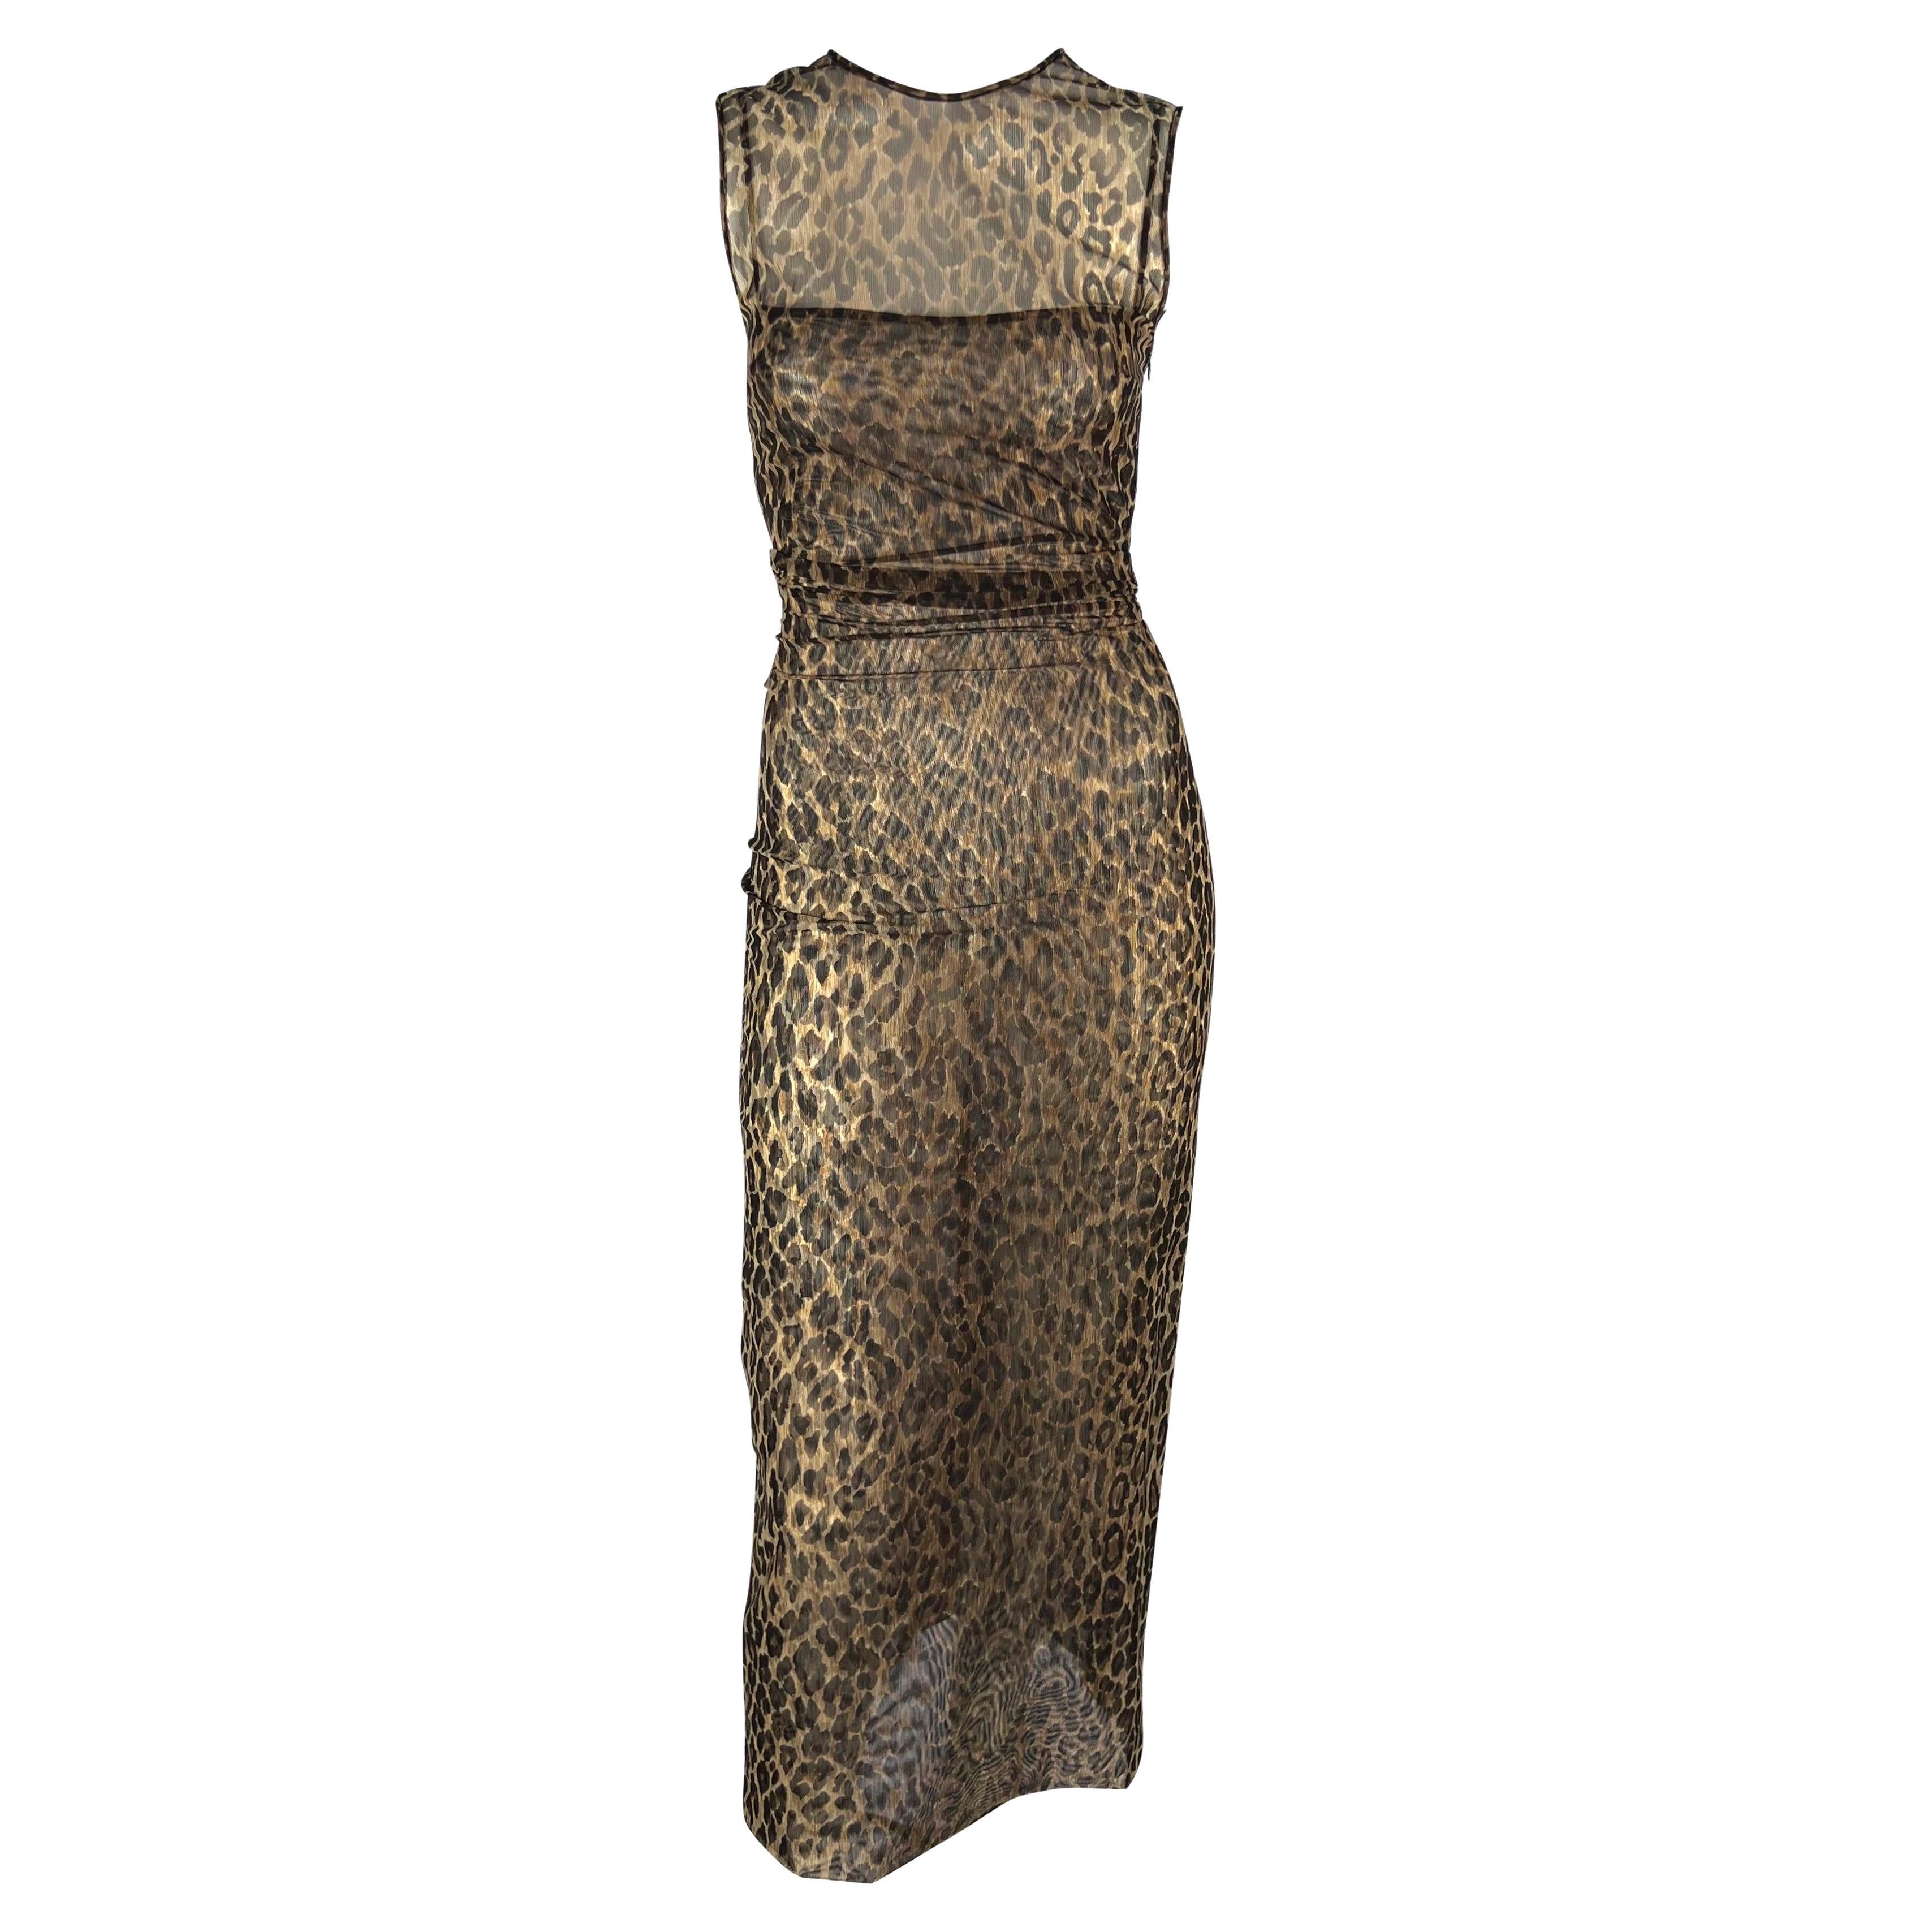 Late 1990s Dolce & Gabbana Sheer Sleeveless Cheetah Print Ruched Bodycon Dress For Sale